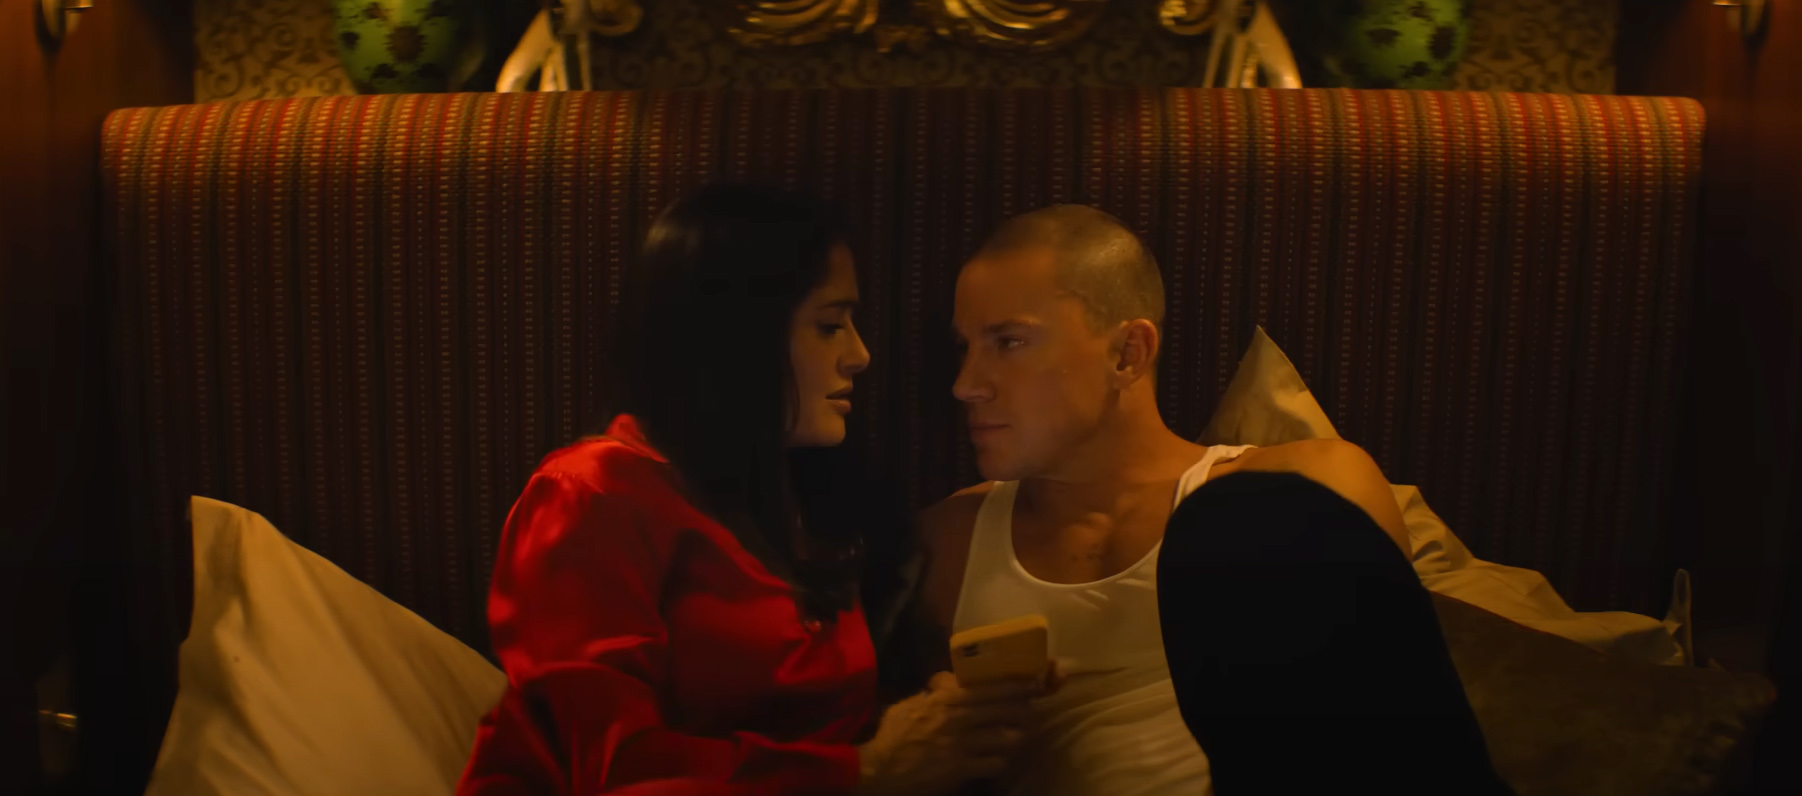 PHOTO: Salma Hayek and Channing Tatum are shown in a screen grab from the trailer for the movie "Magic Mike's Last Dance."